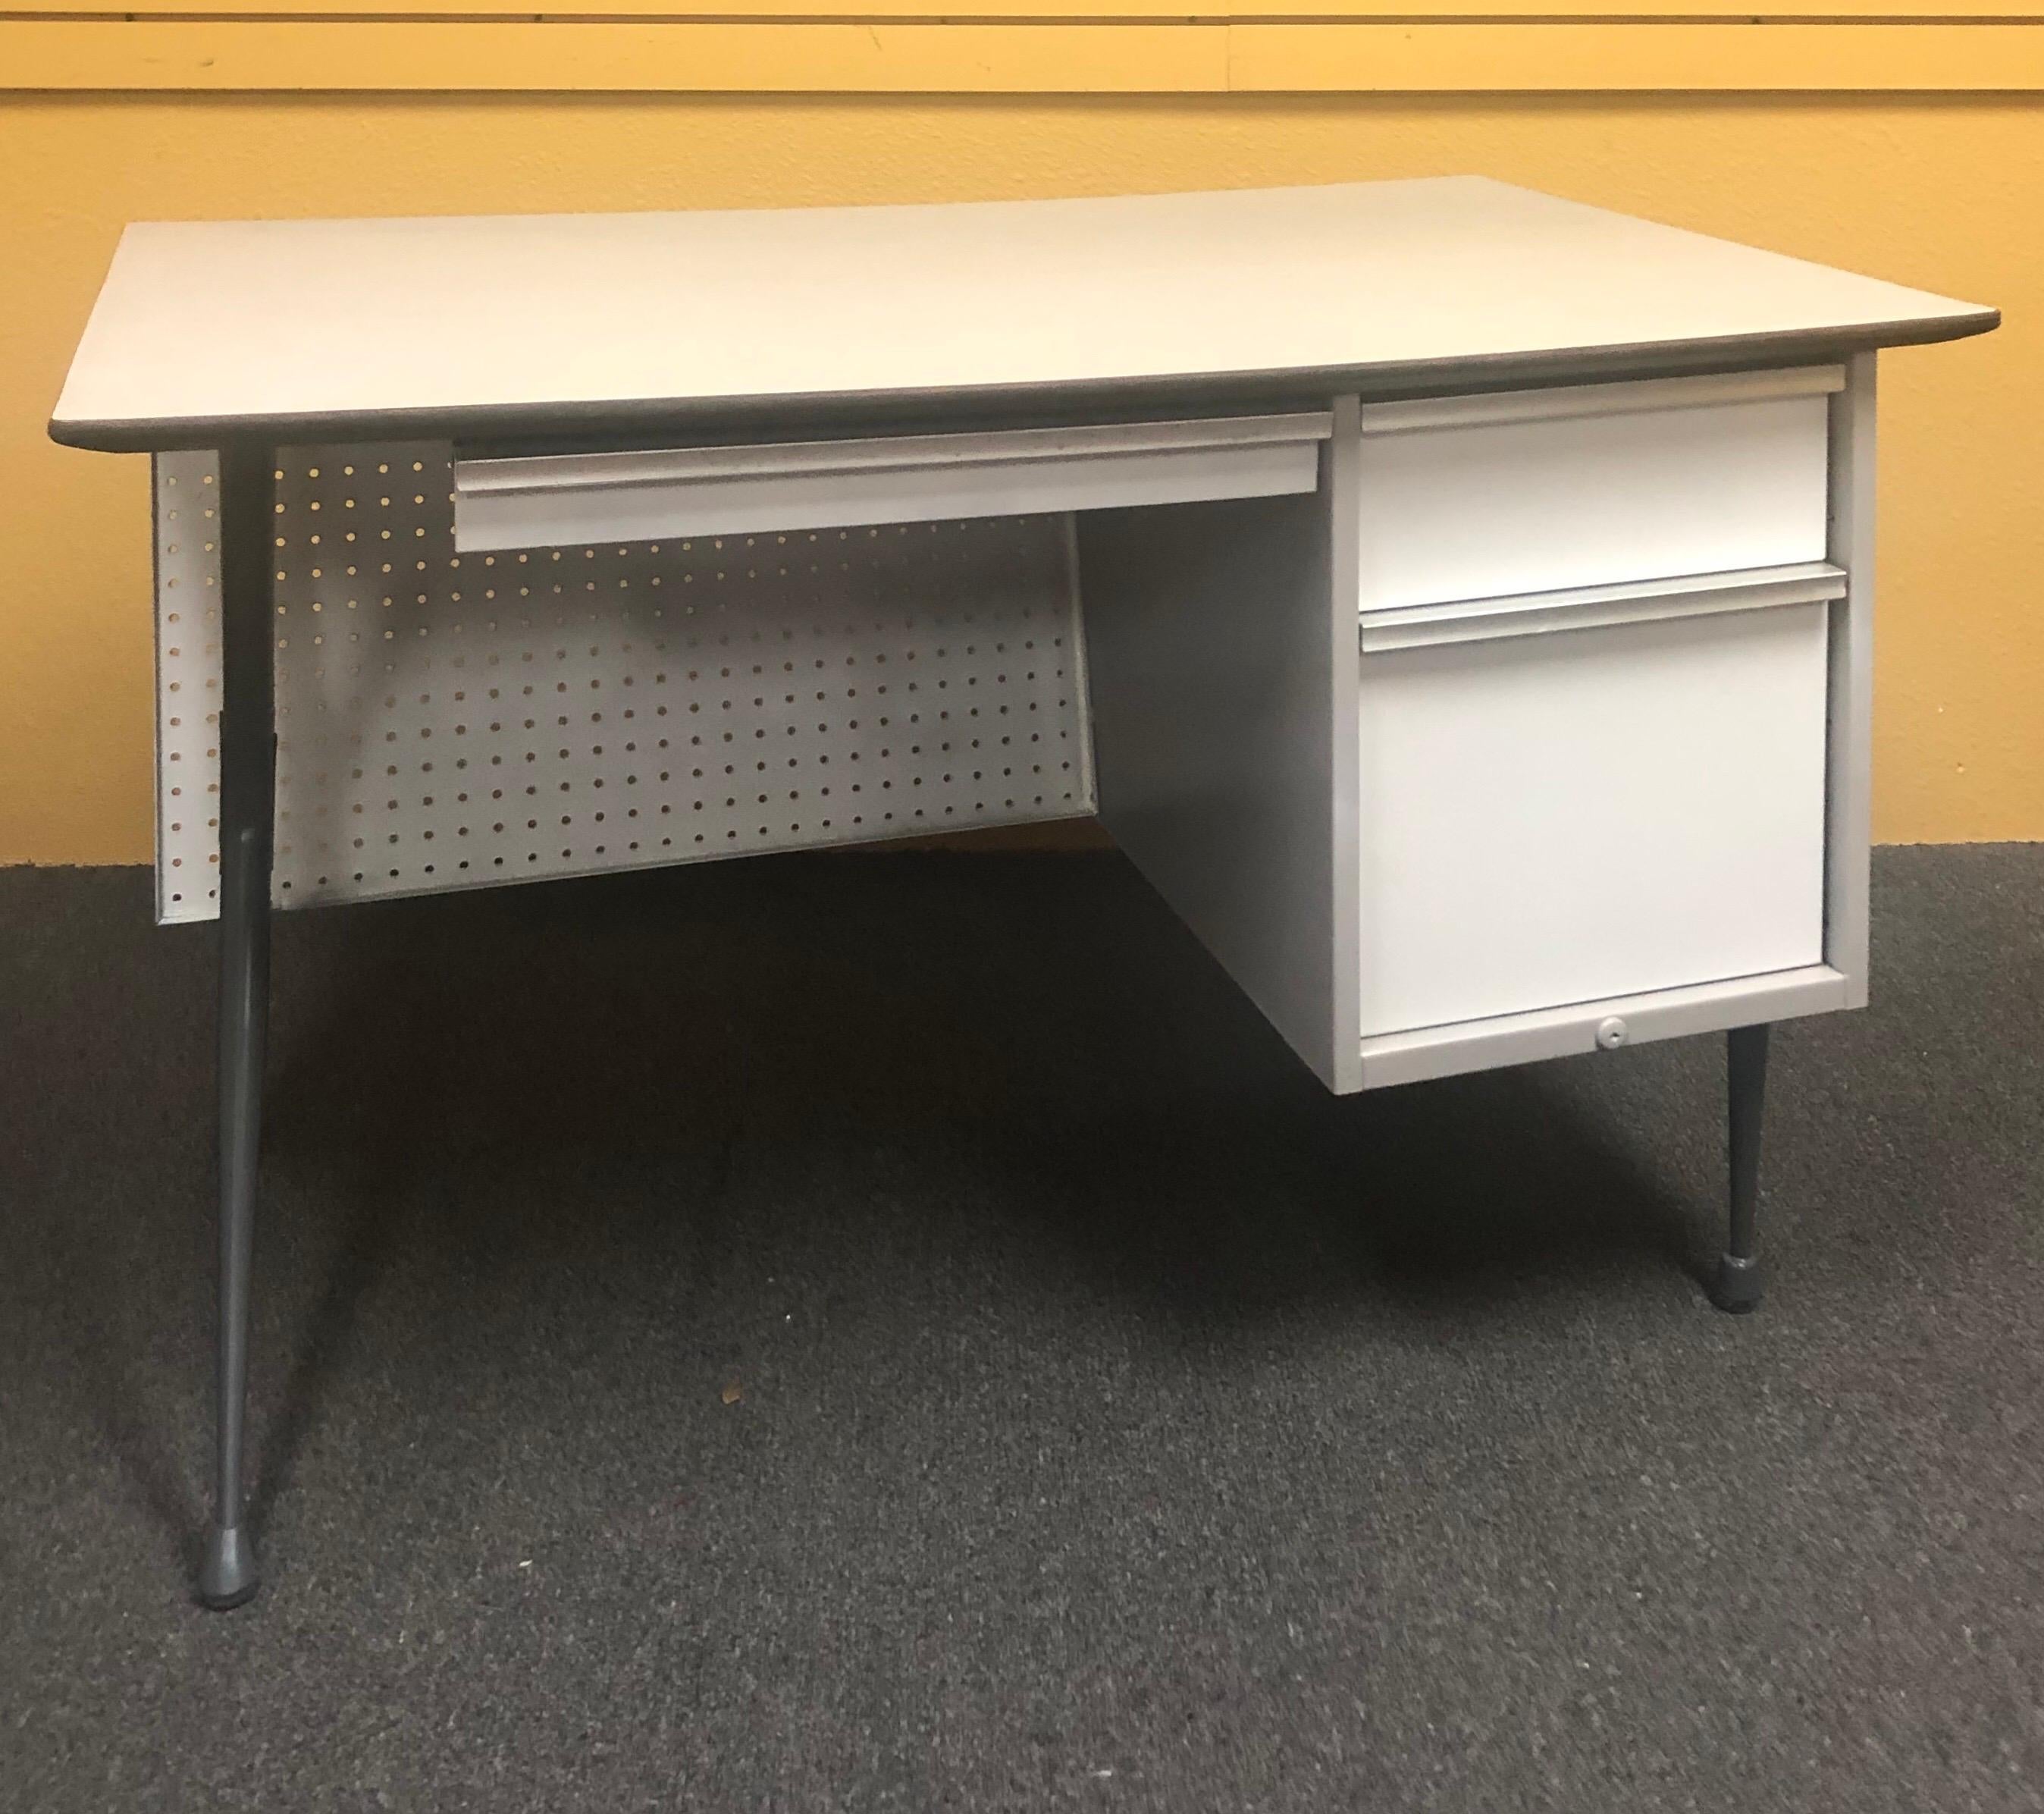 Fantastic industrial midcentury desk by renowned French designer Raymond Loewy for Brunswick of Chicago, circa 1950s. The desk features an exposed metal frame, a unique peg board modesty panel, aluminum trim with original Formica top. It boasts a